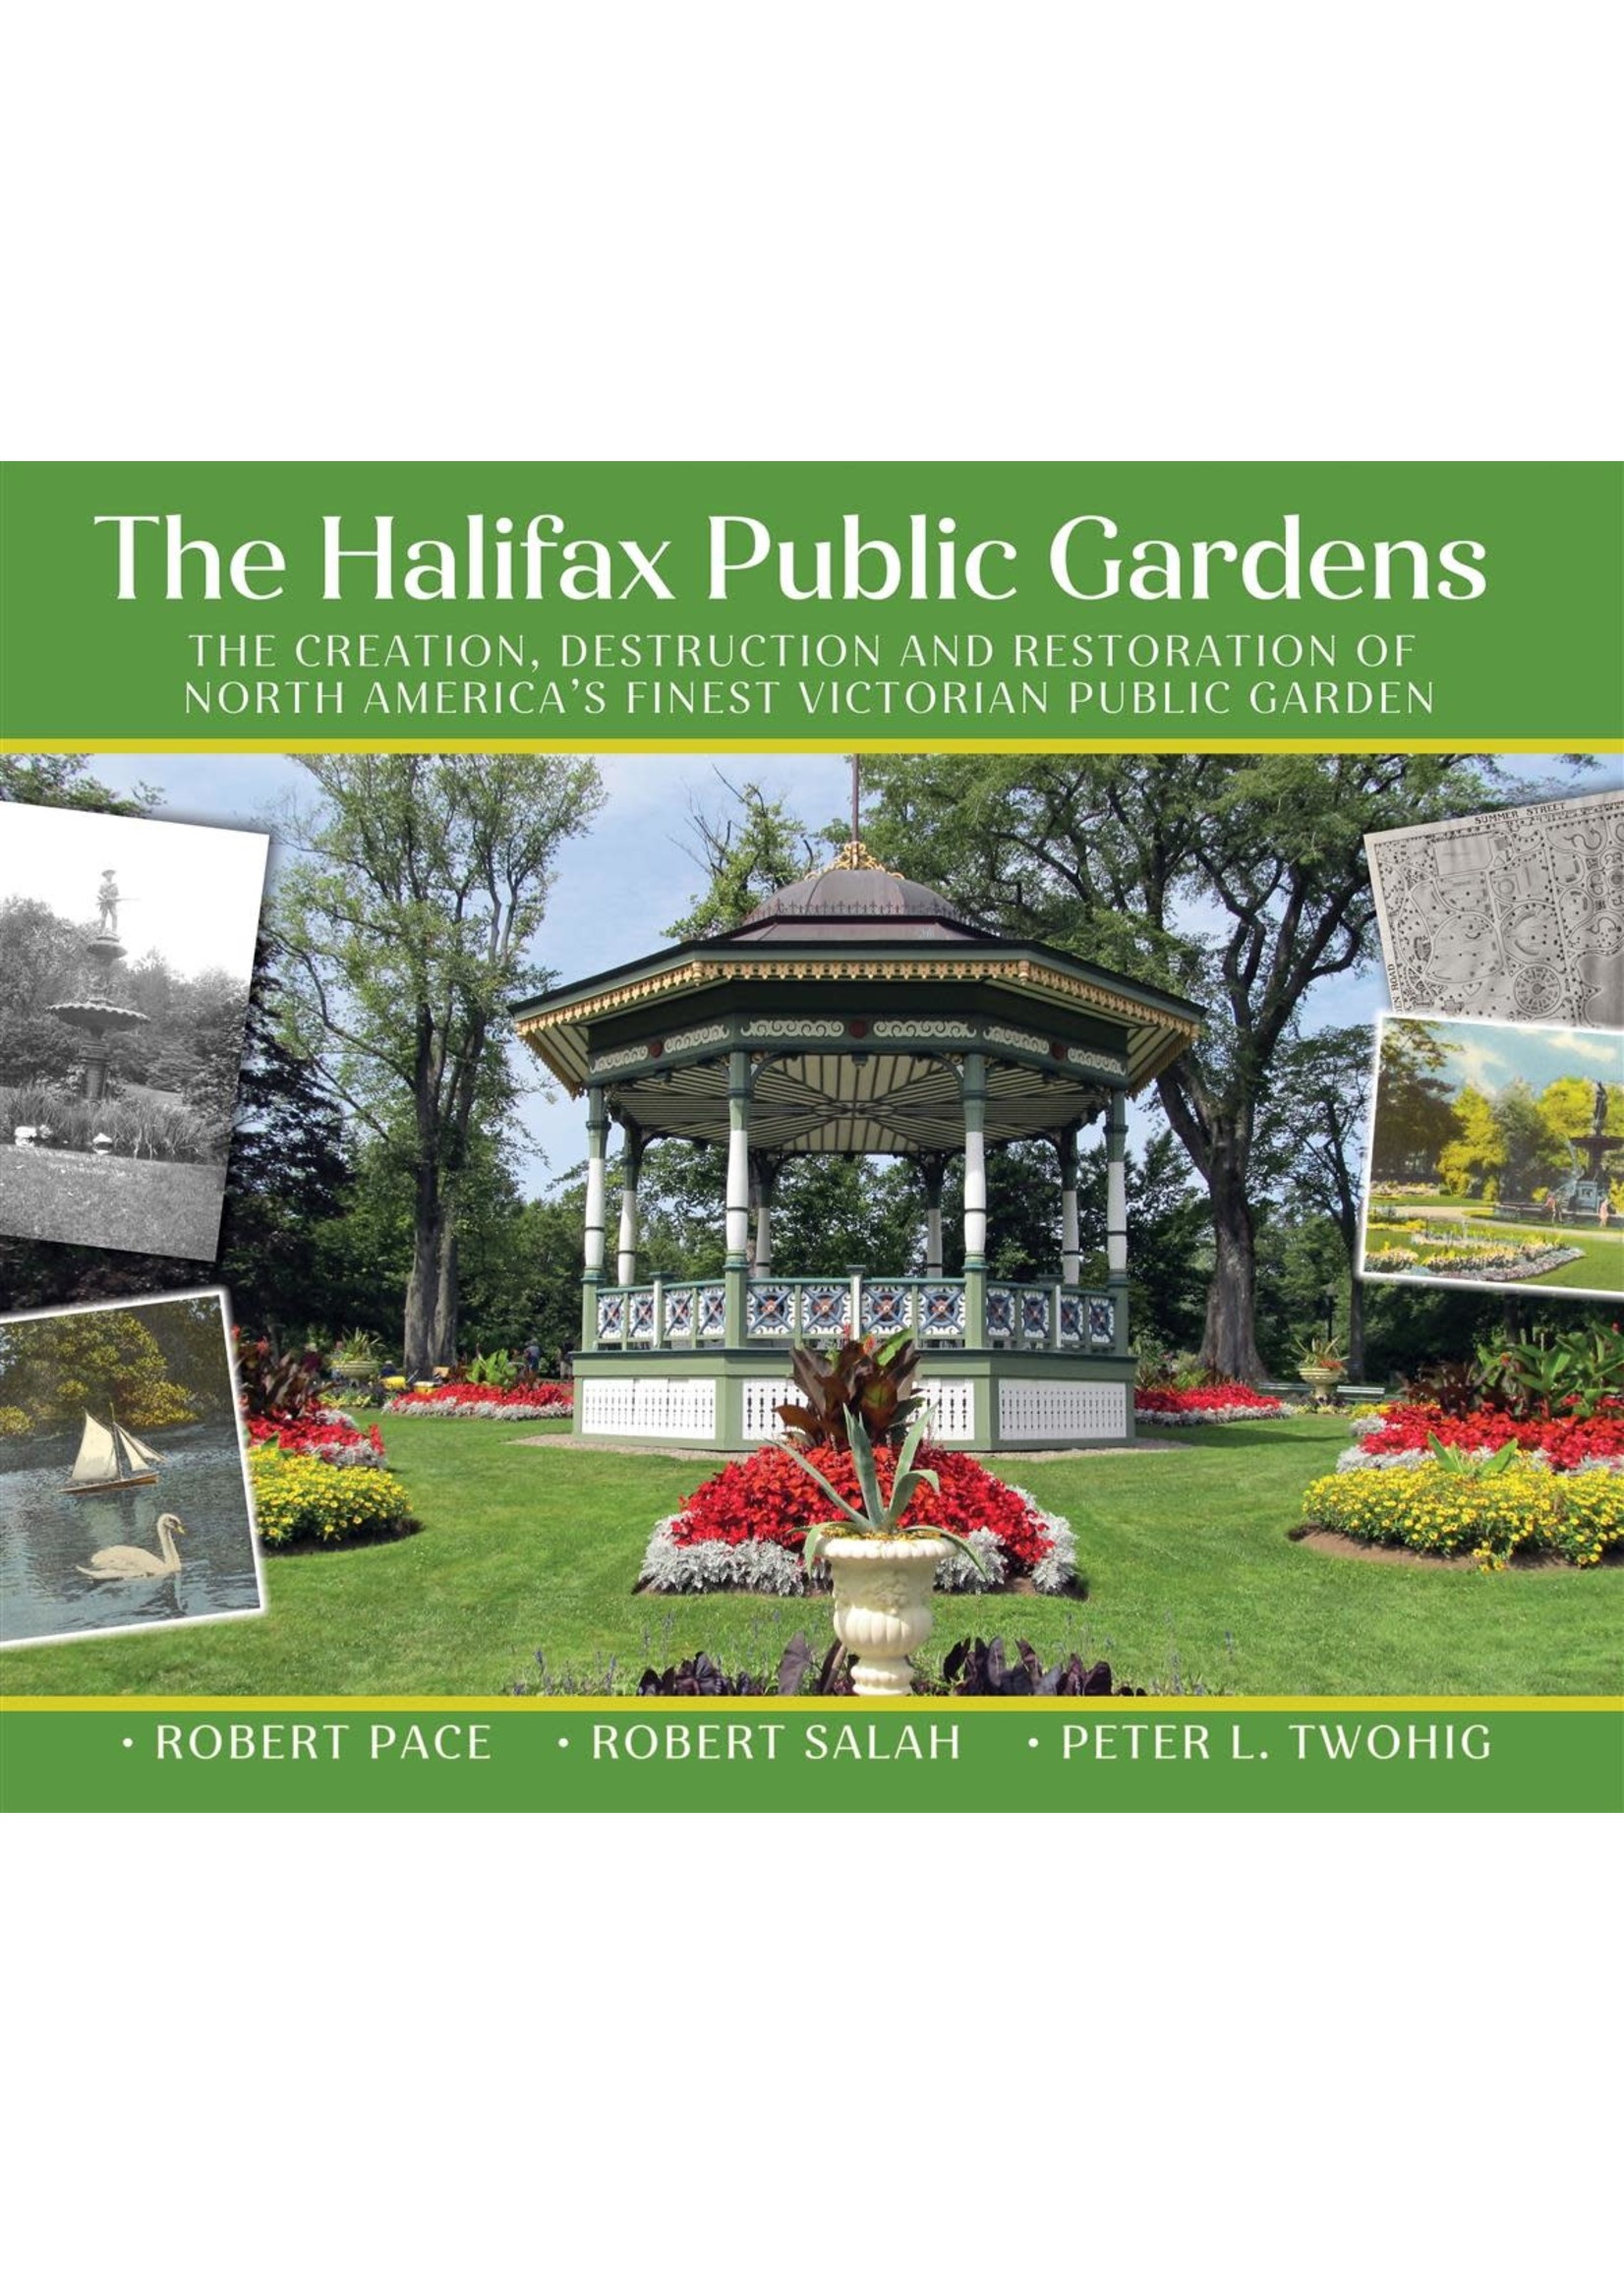 The Halifax Public Gardens: The creation, destruction and restoration of North America’s finest Victorian public gardens by Robert Pace, Robert Salah, Peter L. Twohig